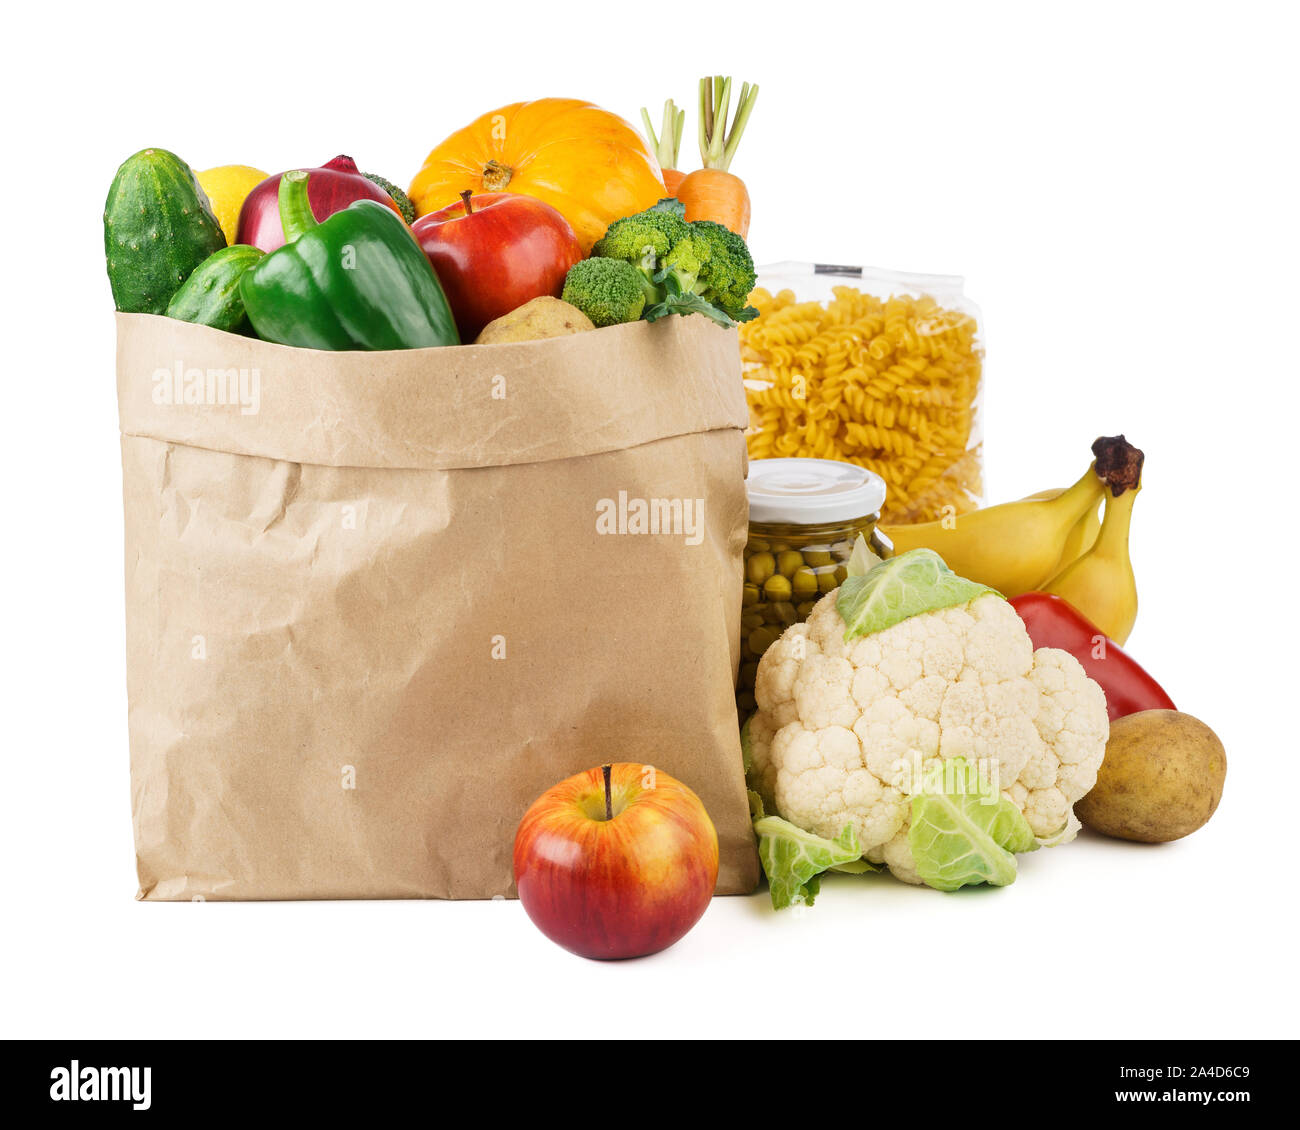 Paper bag with various food - fresh vegetables, fruits, canned goods and bread. Food delivery or donations. Stock Photo